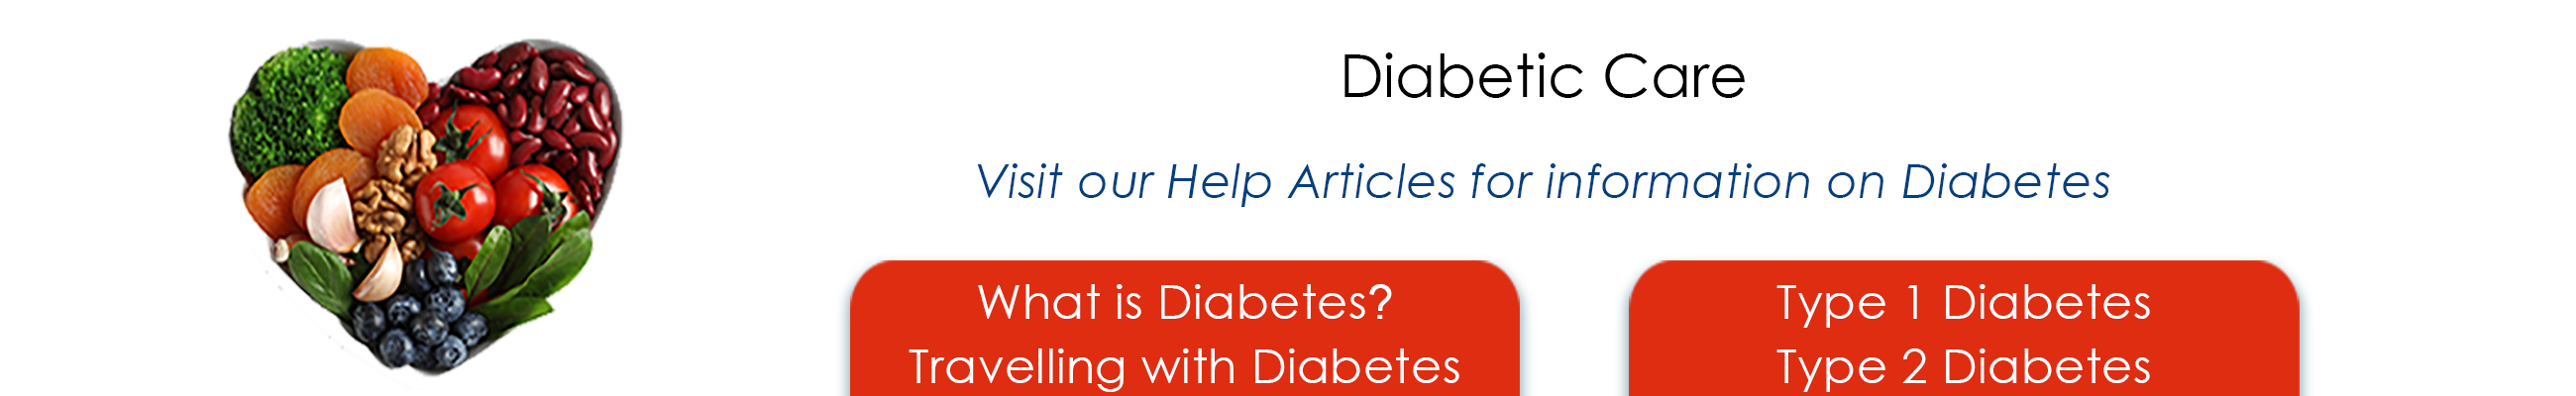 Diabetic care visit our help articles for information on Diabetes. What is diabetes? Travelling with diabetes, type 1 diabetes, type 2 diabetes